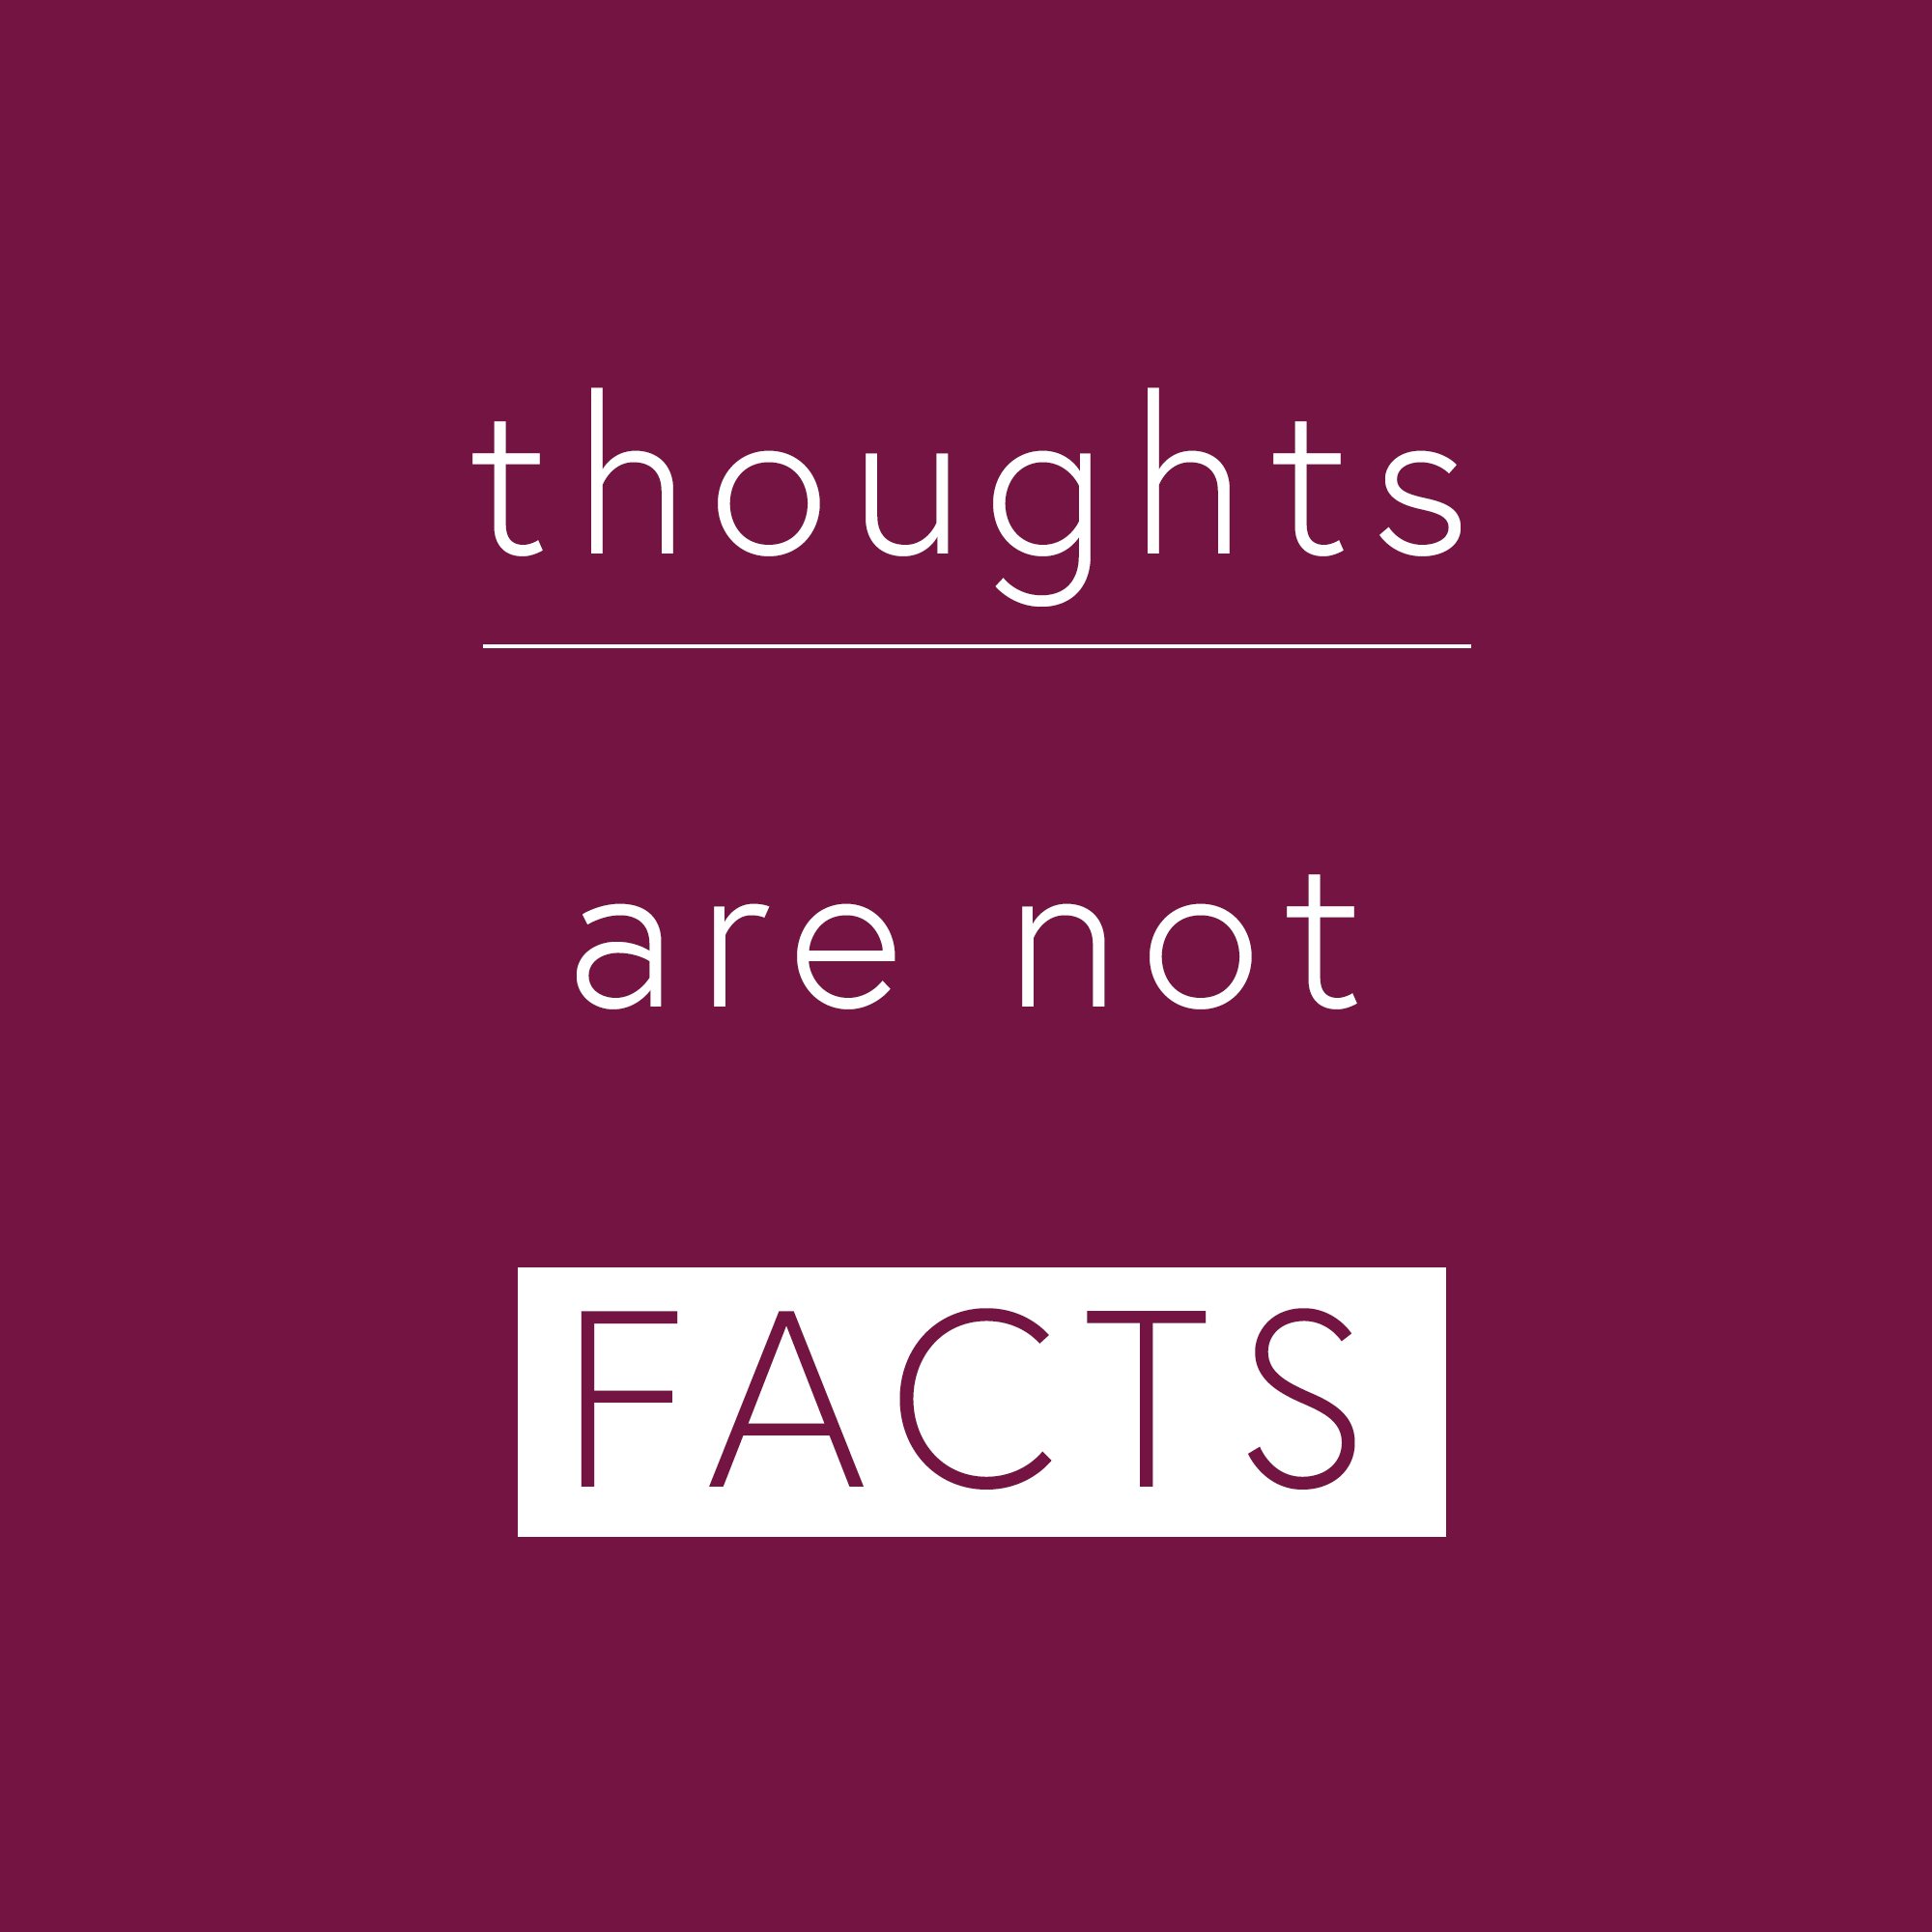 Isn't this a reminder we can all use? Just because you have a thought doesn't necessarily mean it's true. Do you ever find yourself in a pattern of negative thinking? Stop and ask yourselt it it's true. Don't let your thoughts steal your happiness. W